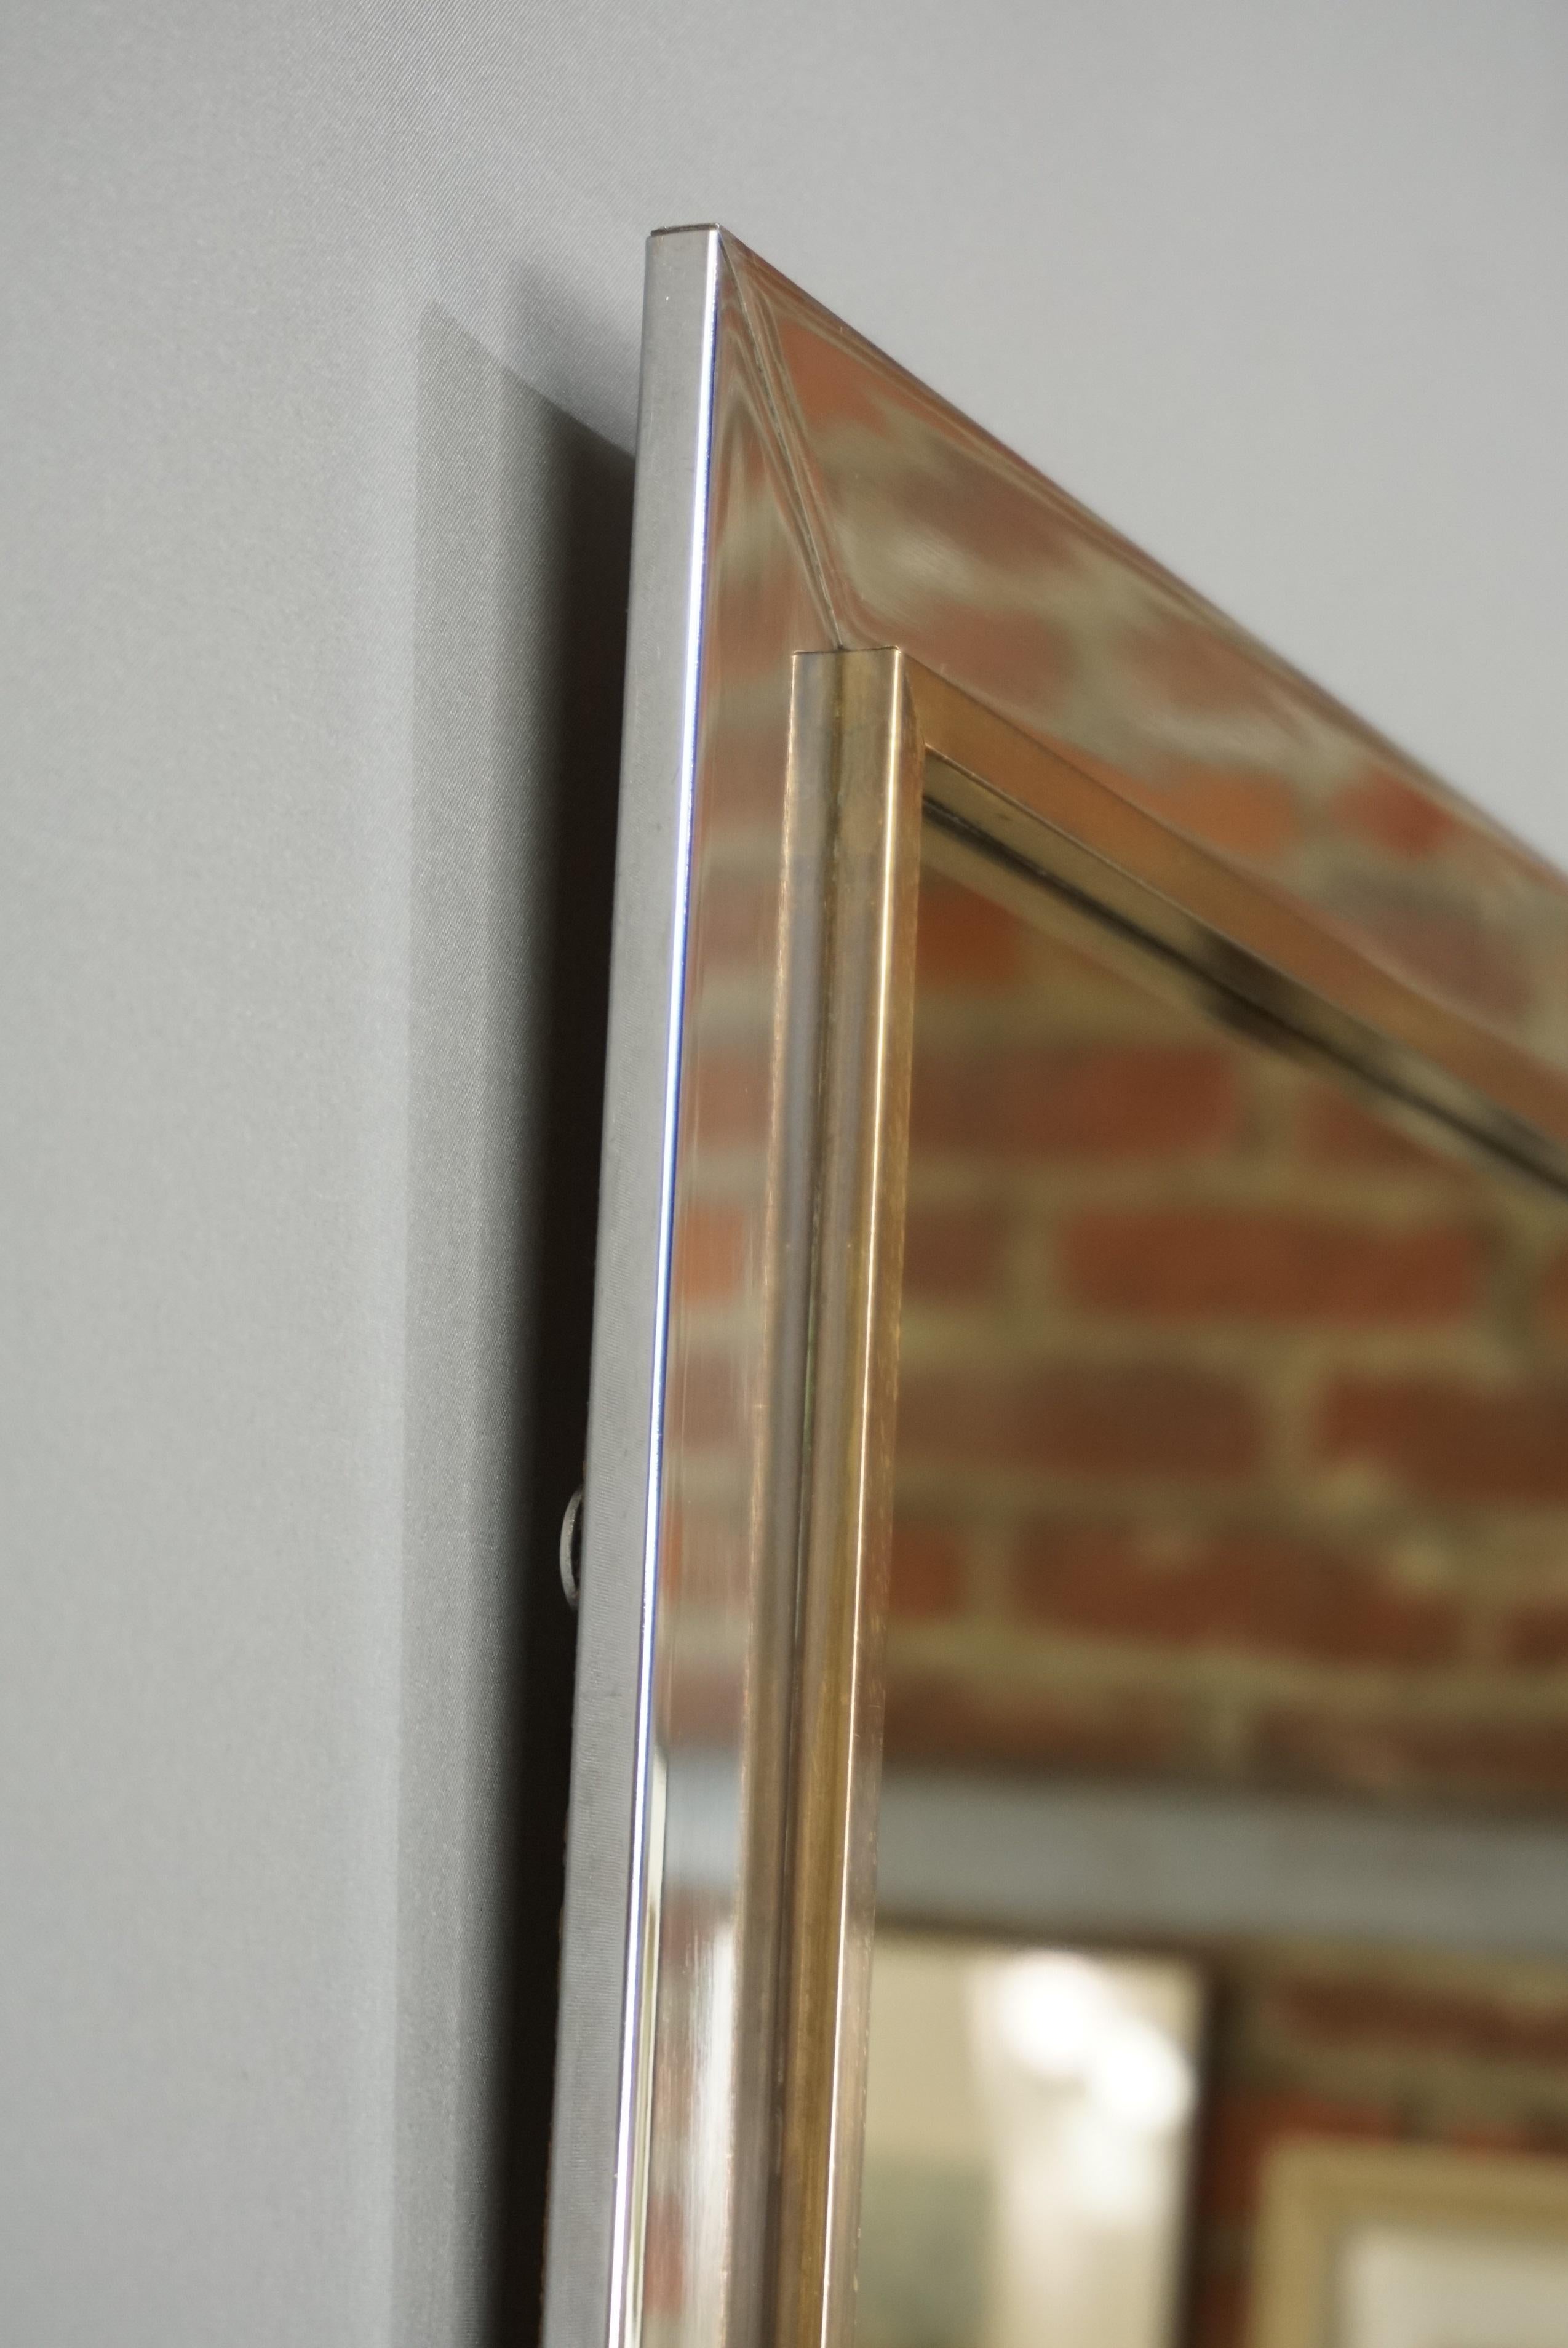 Space Age Chrome Brass And Bronze Colored Mirror By BC Design 